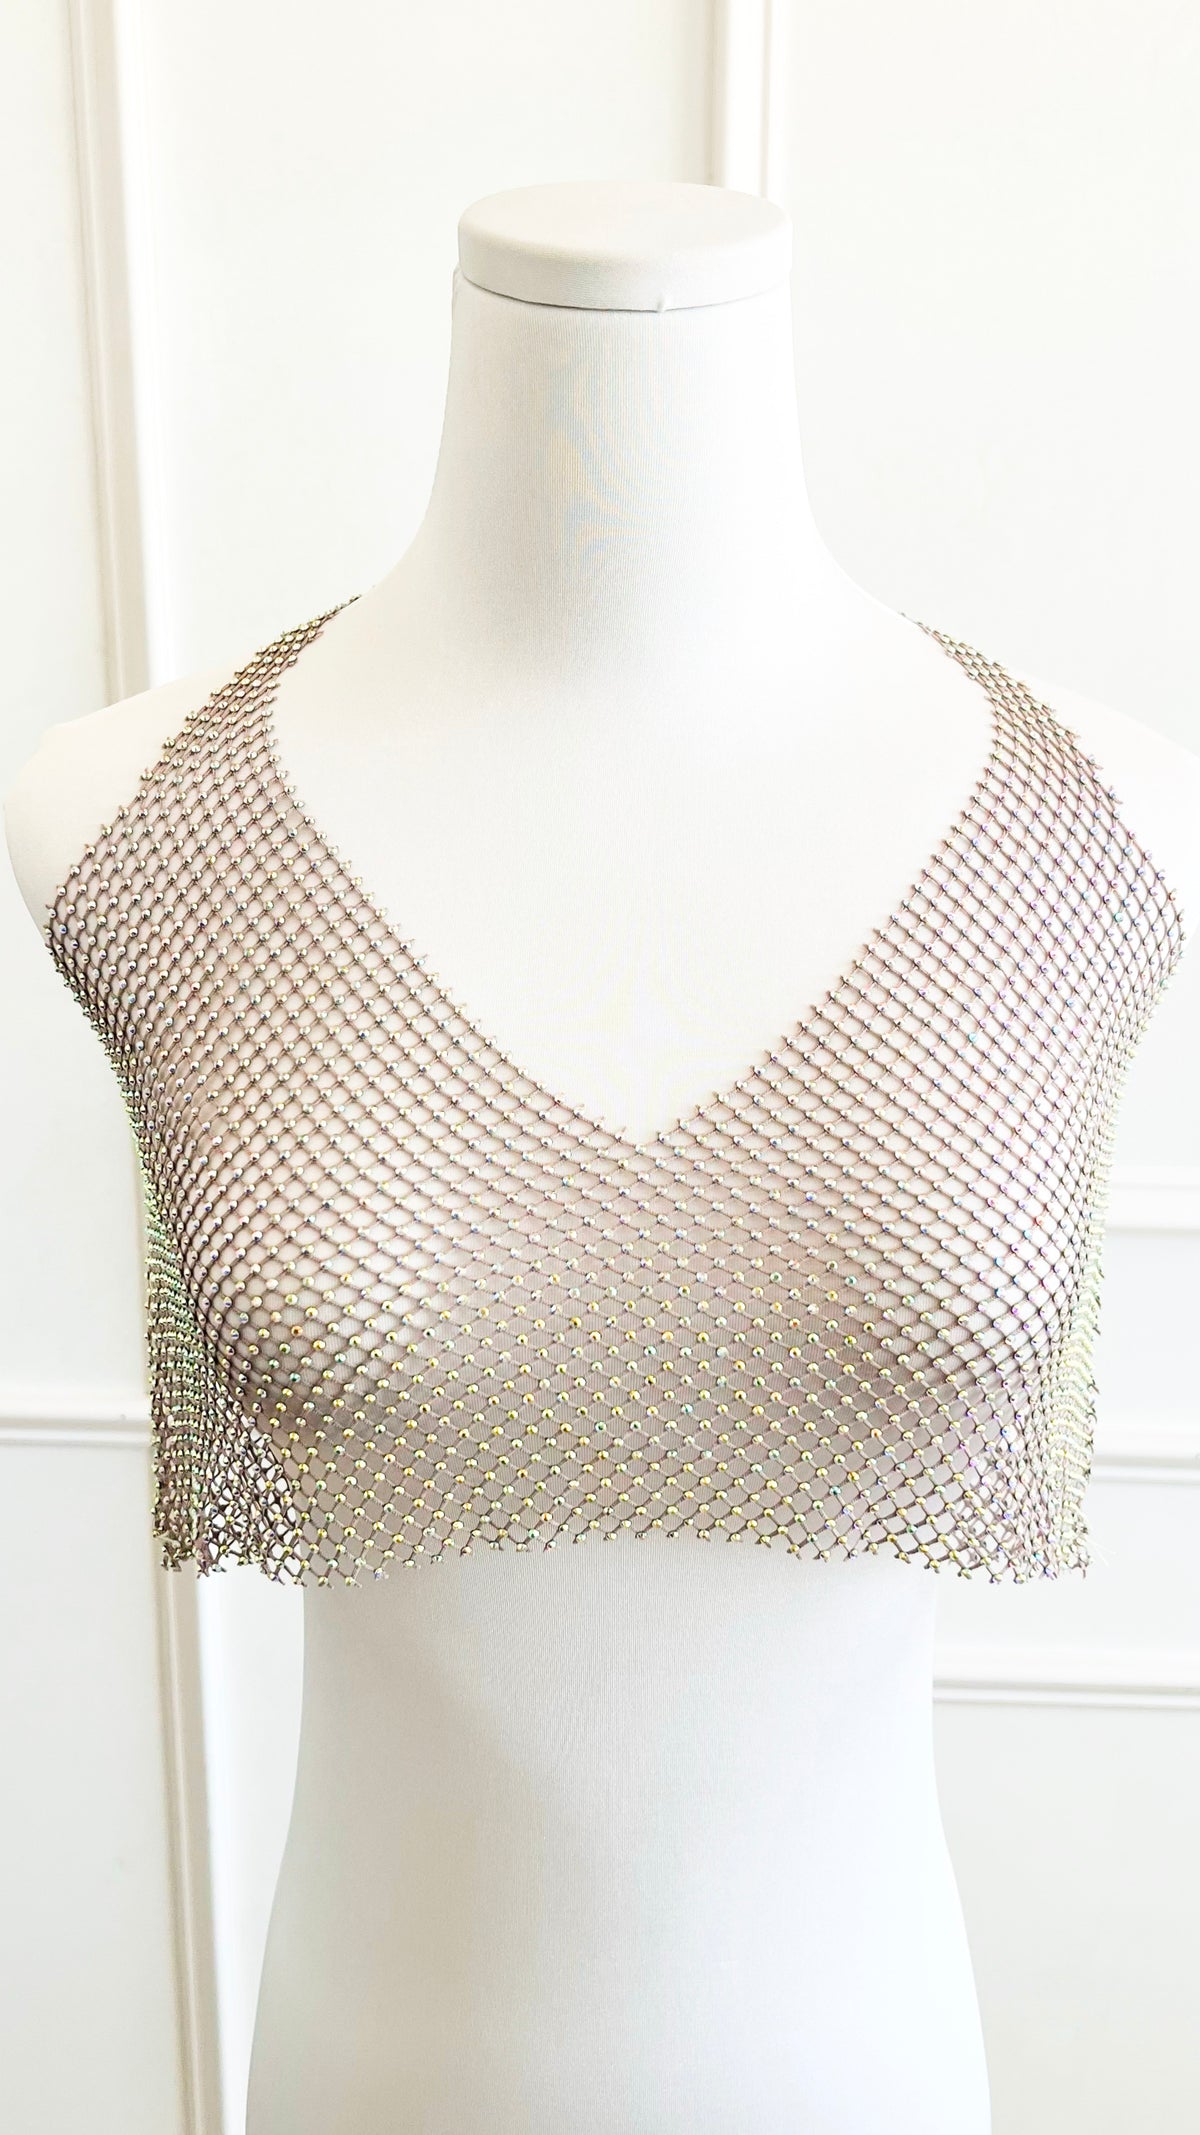 CZ Mesh Top - Khaki-100 Sleeveless Tops-ICCO ACCESSORIES-Coastal Bloom Boutique, find the trendiest versions of the popular styles and looks Located in Indialantic, FL